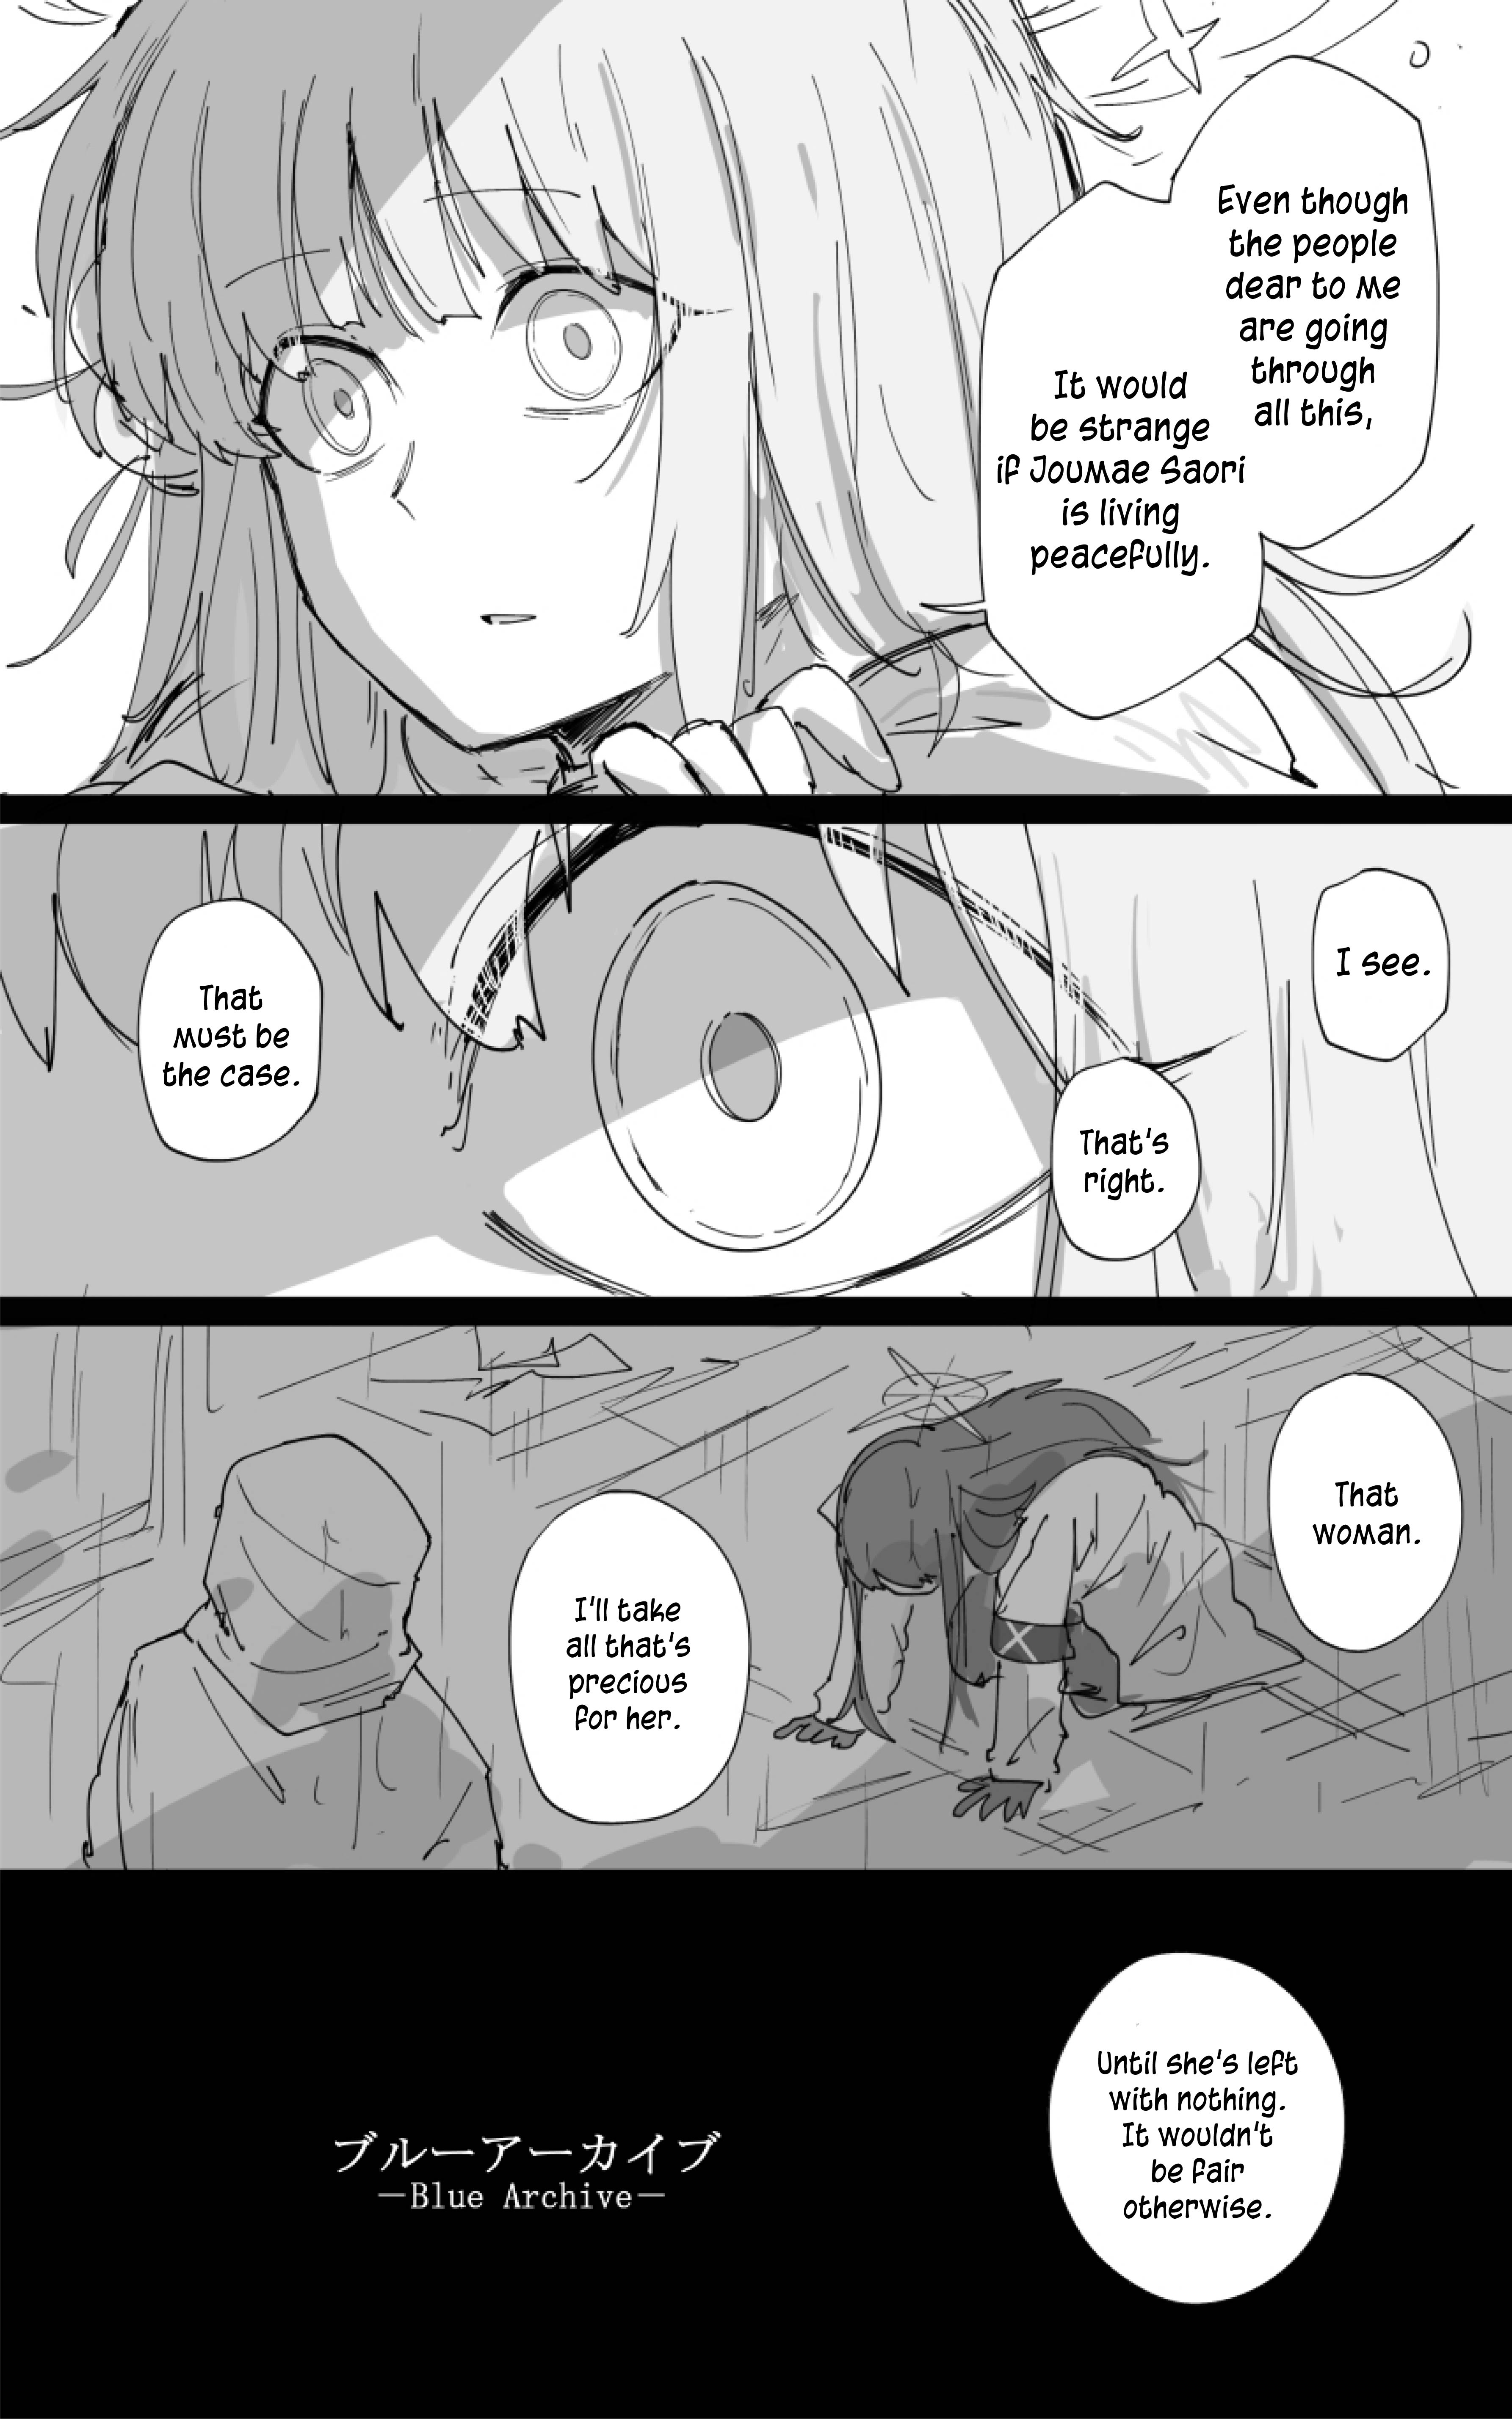 Blue Archive - Kankan's Blue Archive Logs (Doujinshi) Chapter 15 - Picture 2